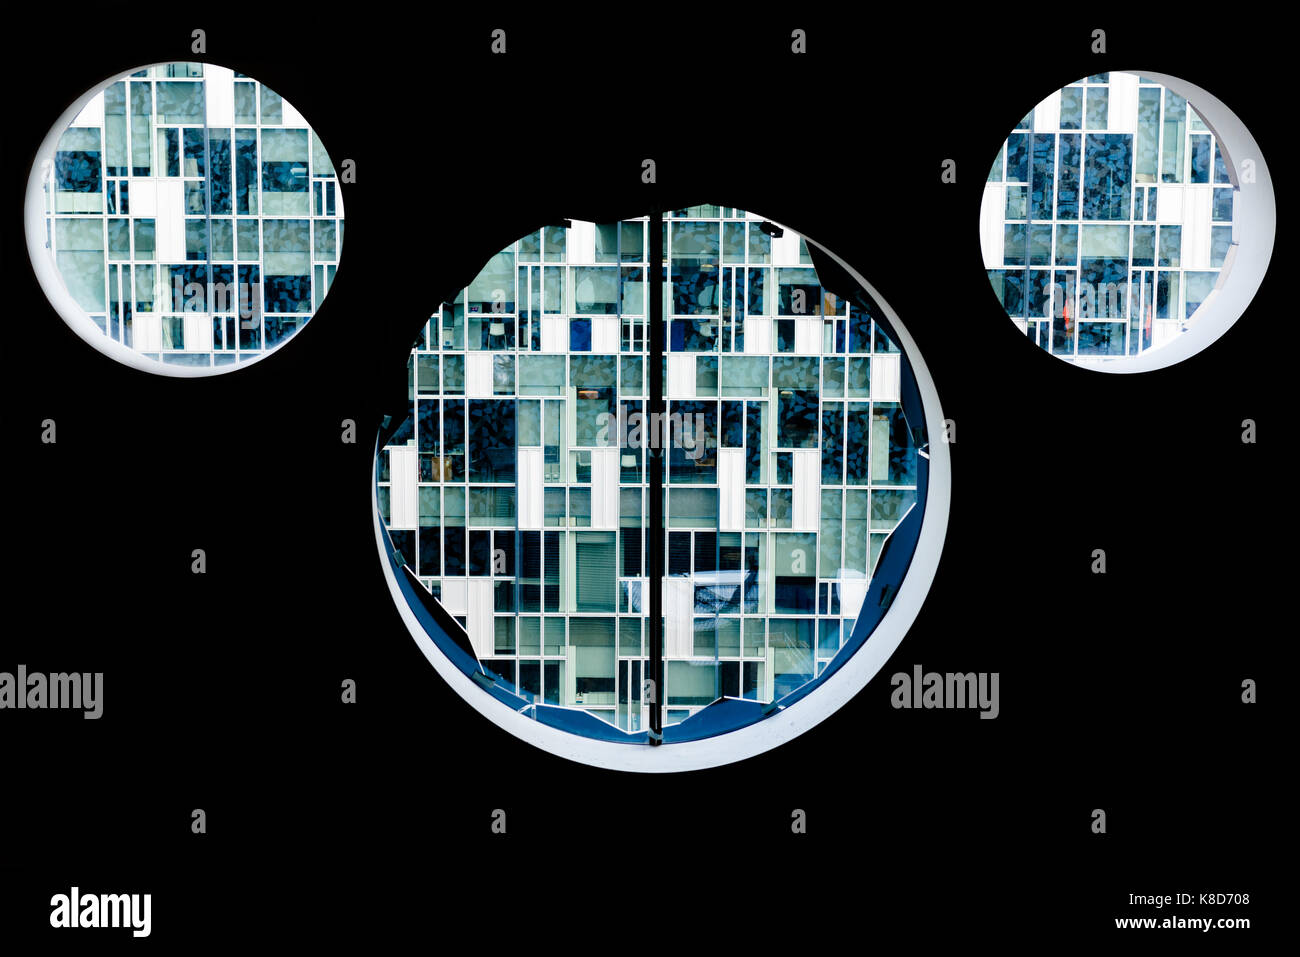 Ravensbourne College round windows showing apartment buildings in Greenwich London Stock Photo